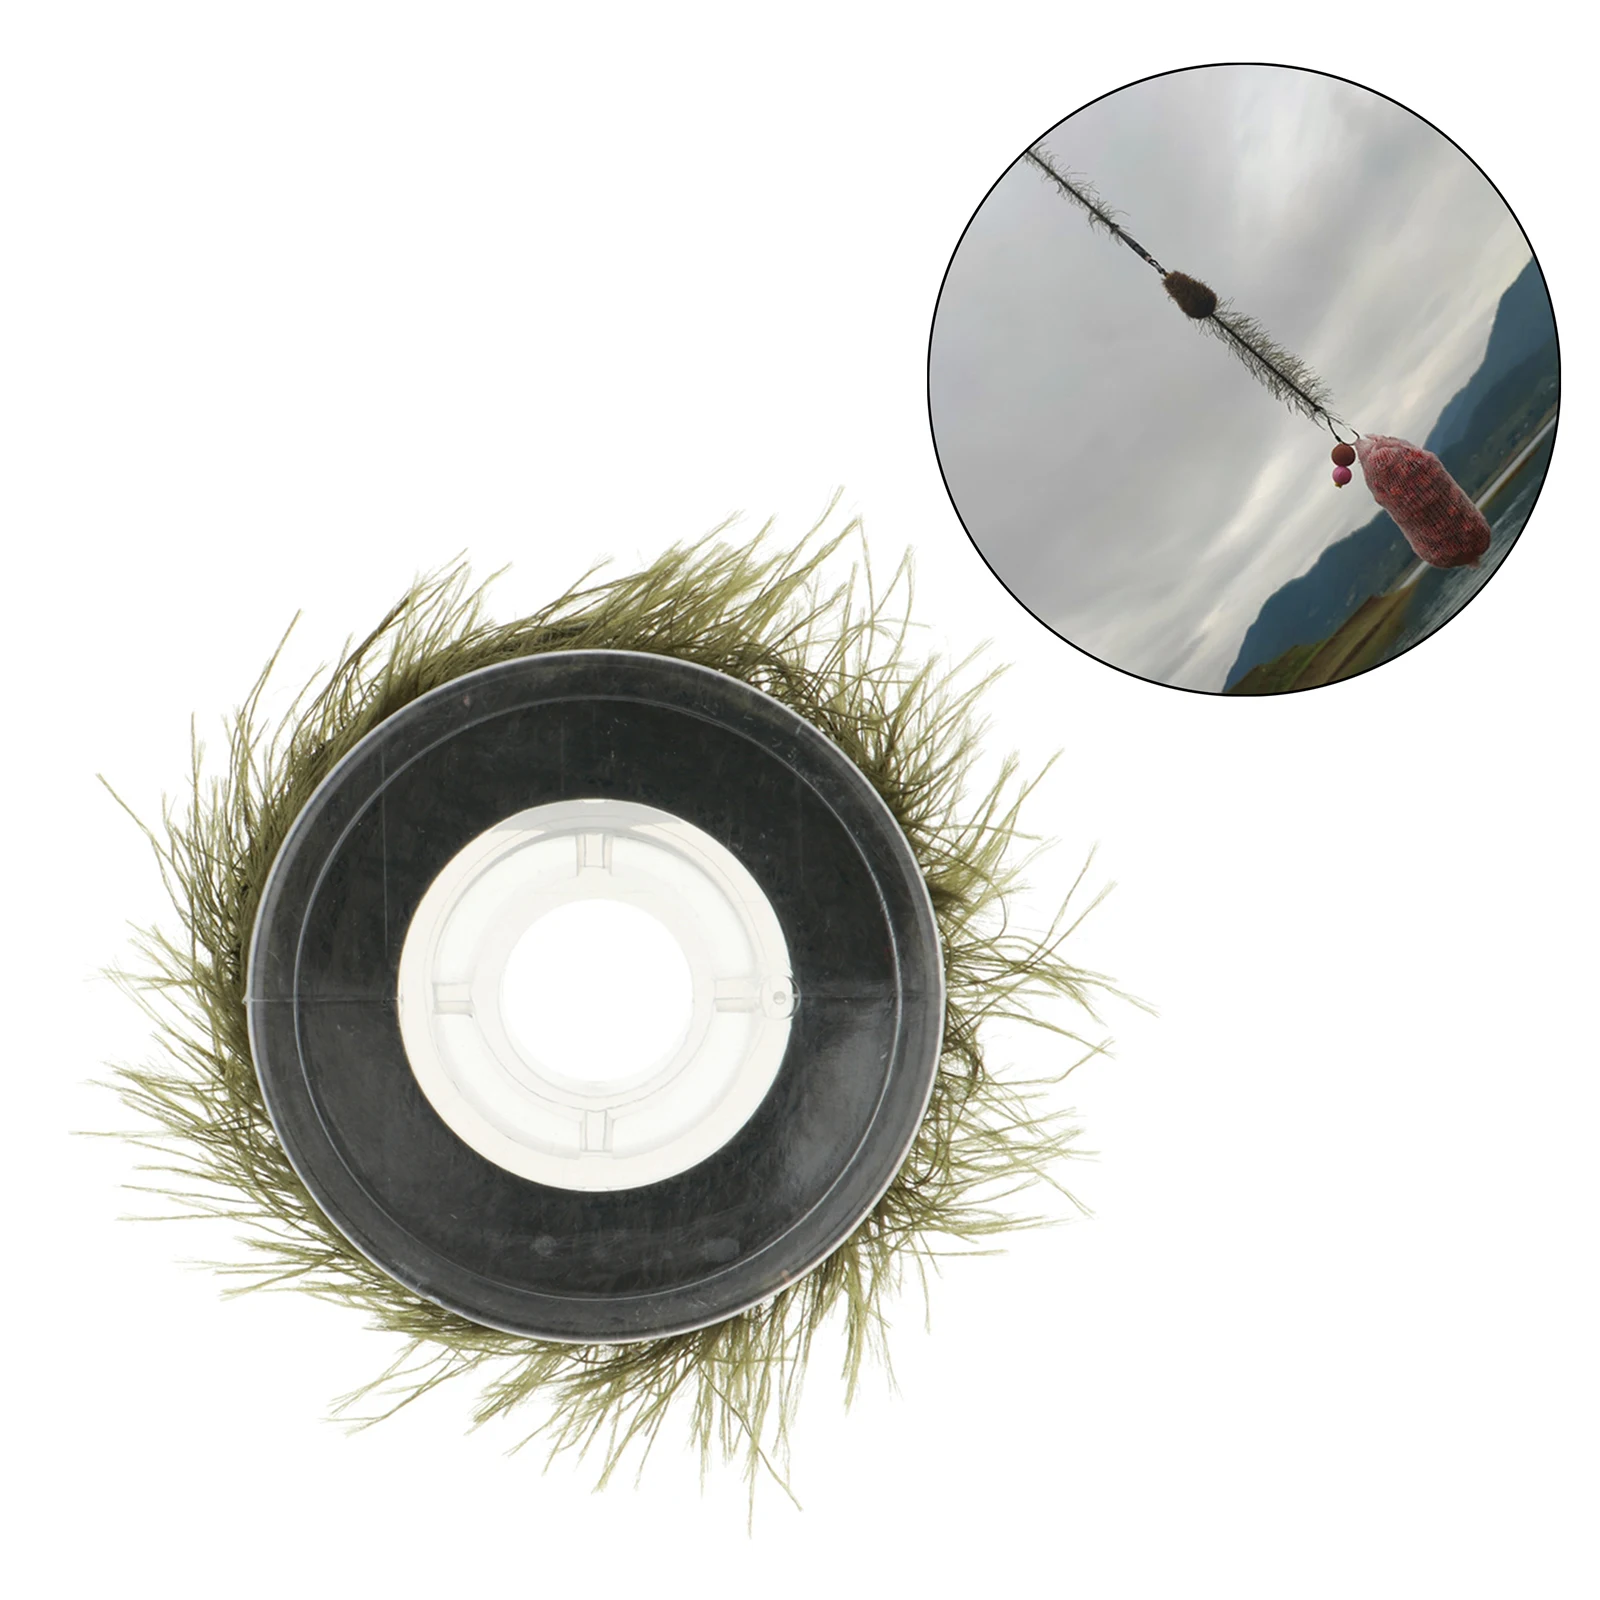 Seaweed Carp Rigs Fishing Hook Rig Fishing Terminal Tackle Synthetic Fiber, Easy to Install